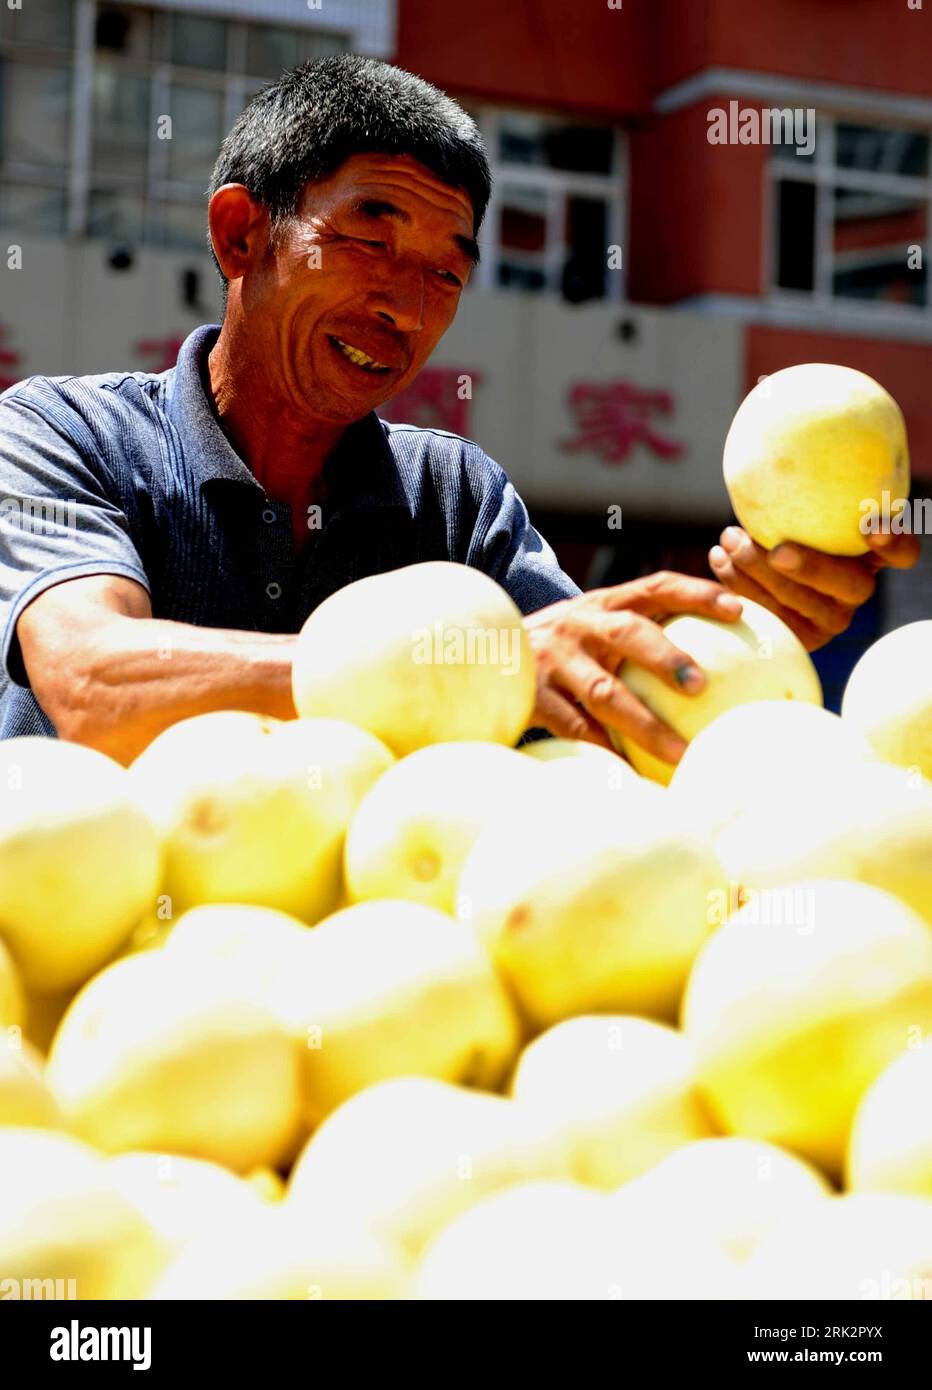 Bildnummer: 53235423  Datum: 01.08.2009  Copyright: imago/Xinhua (090801) -- DENGKOU, Aug. 1, 2009 (Xinhua) -- A farmer sells honeydew melons in Bayan Gol of Dengkou County in north China s Inner Mongolia Autonomous Region, July 31, 2009. Large amount of honeydew melons and watermelons from Inner Mongolia have come to the market in China. (Xinhua/Ren Junchuan) (hdt) (3)CHINA-INNER MONGOLIA-HONEYDEW MELON (CN)  PUBLICATIONxNOTxINxCHN  Honigmelone Honigmelonen Melone Melonen Mongolei kbdig xsk  2009 hoch     Image number 53235423 Date 01 08 2009 Copyright Imago XINHUA 090801 Dengkou Aug 1 2009 X Stock Photo